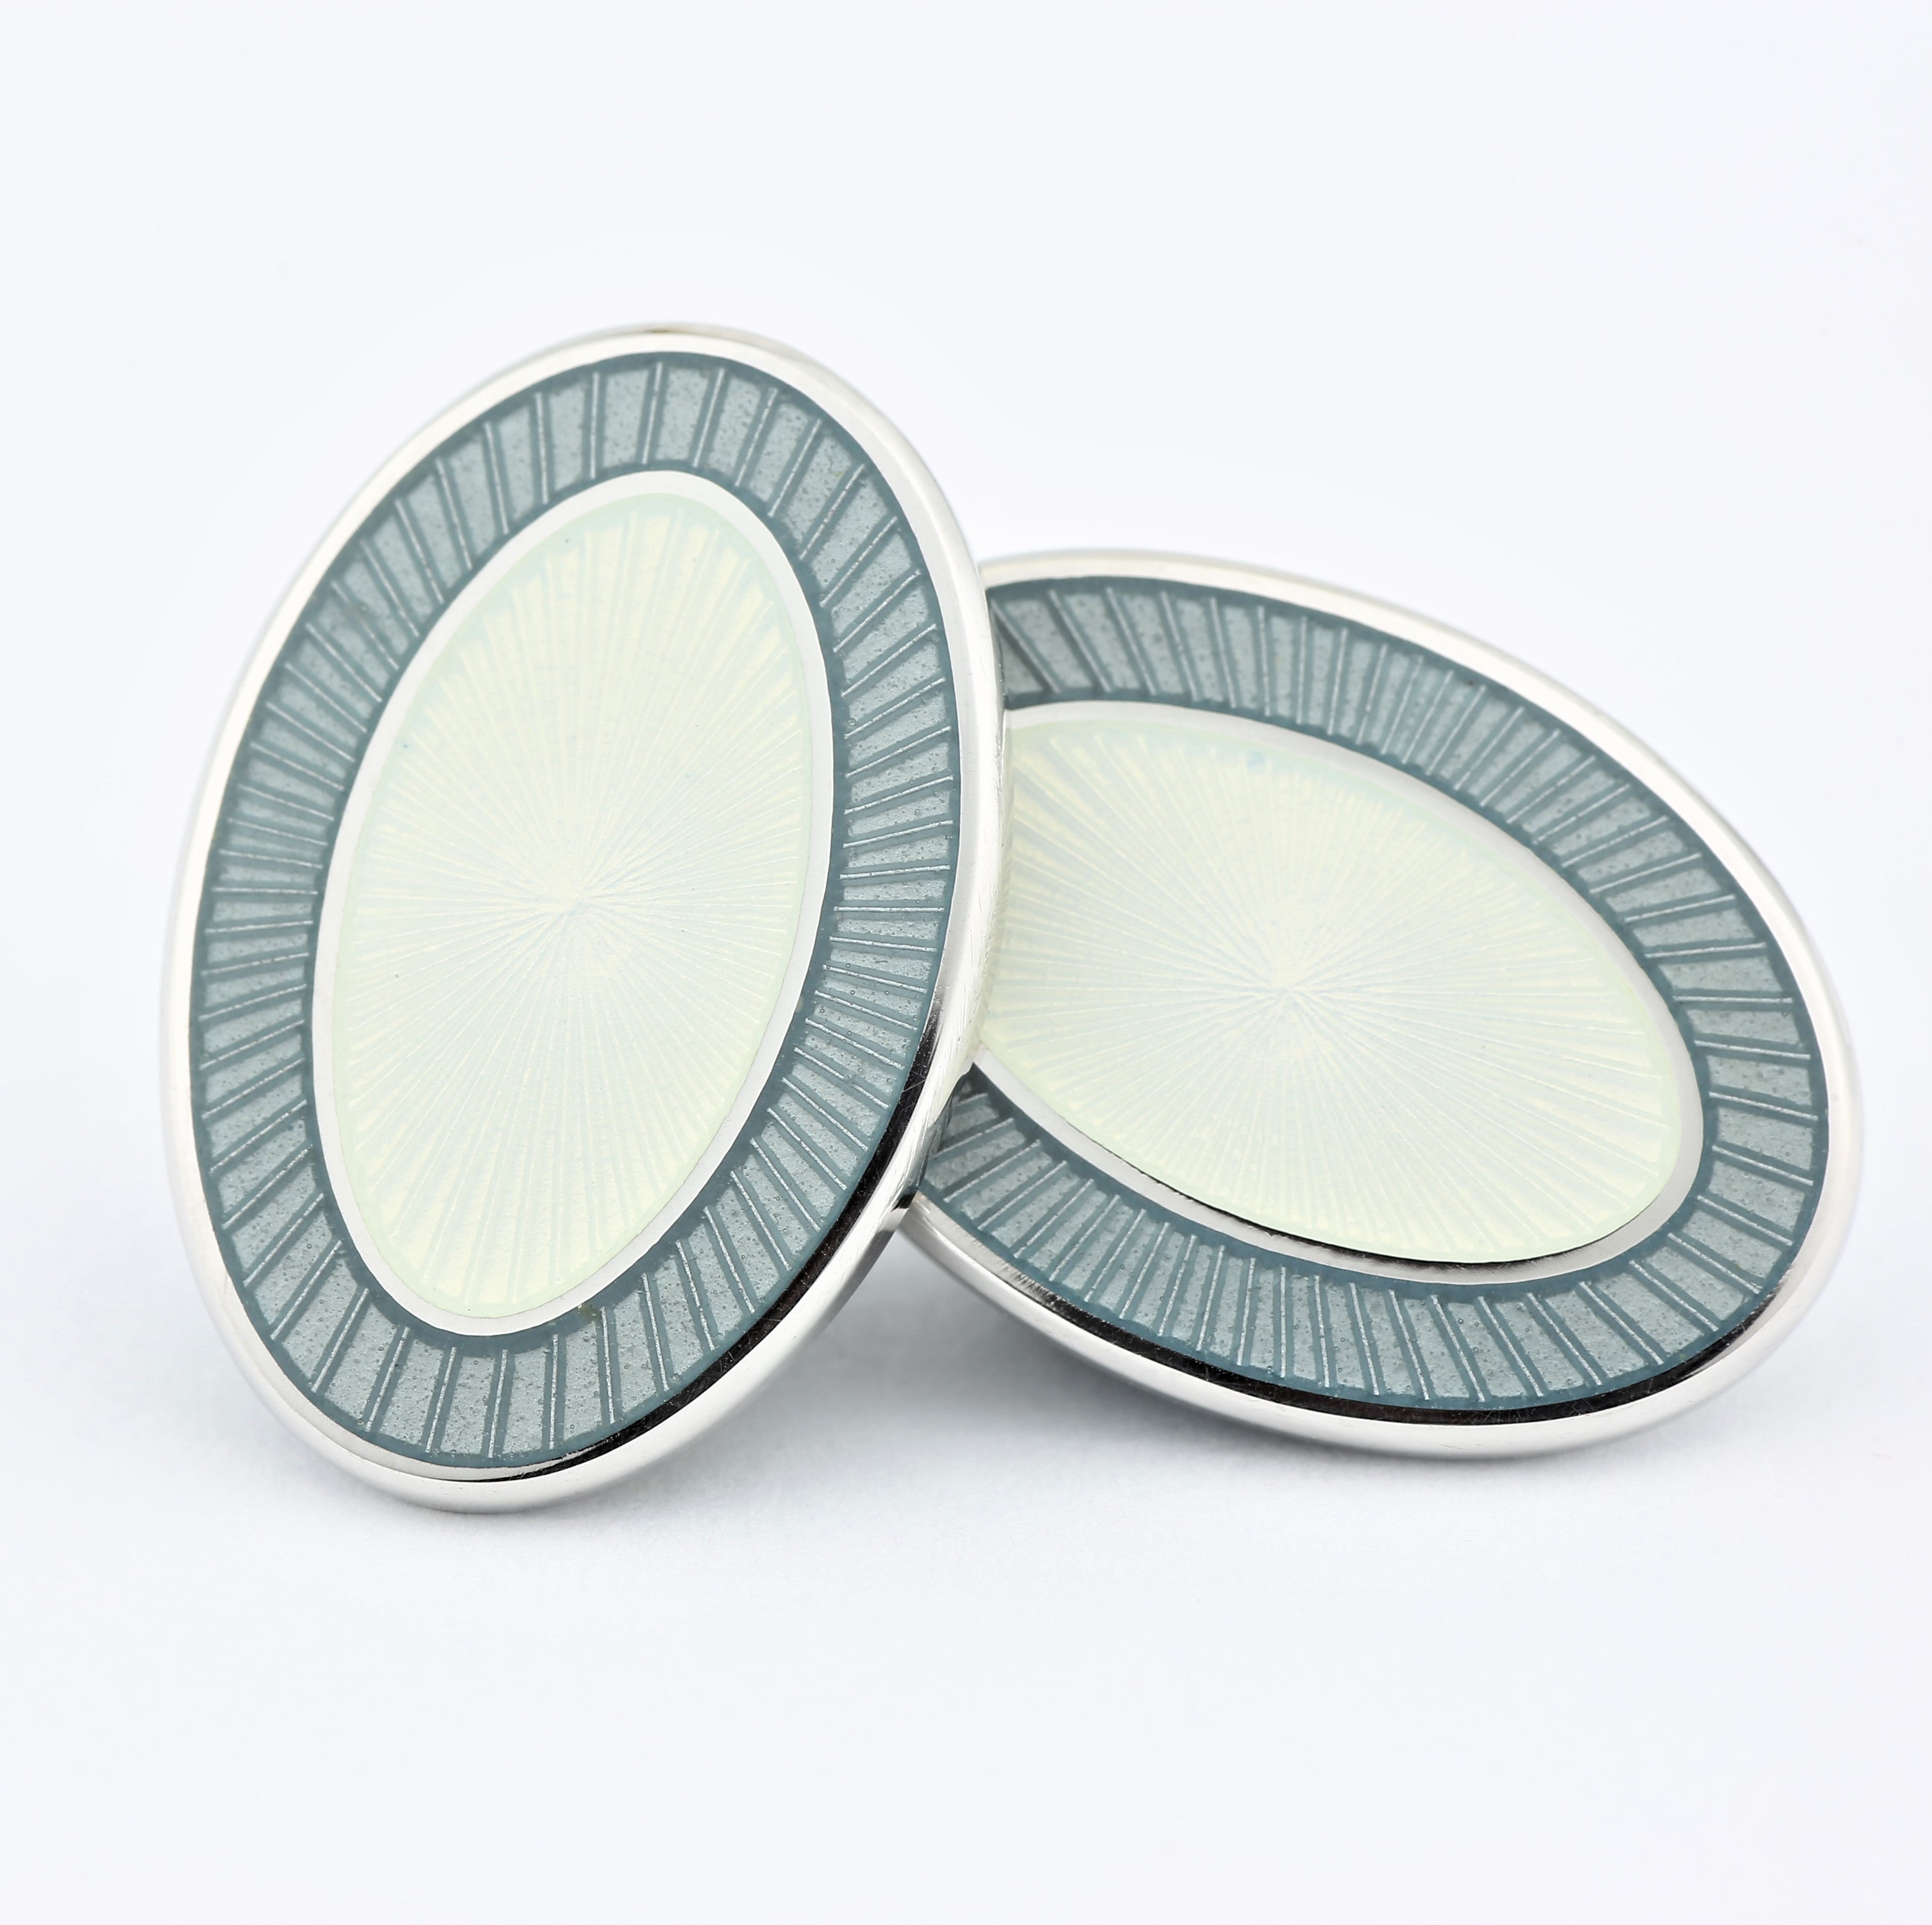 Double oval grey and white cufflinks in enamel on sterling silver